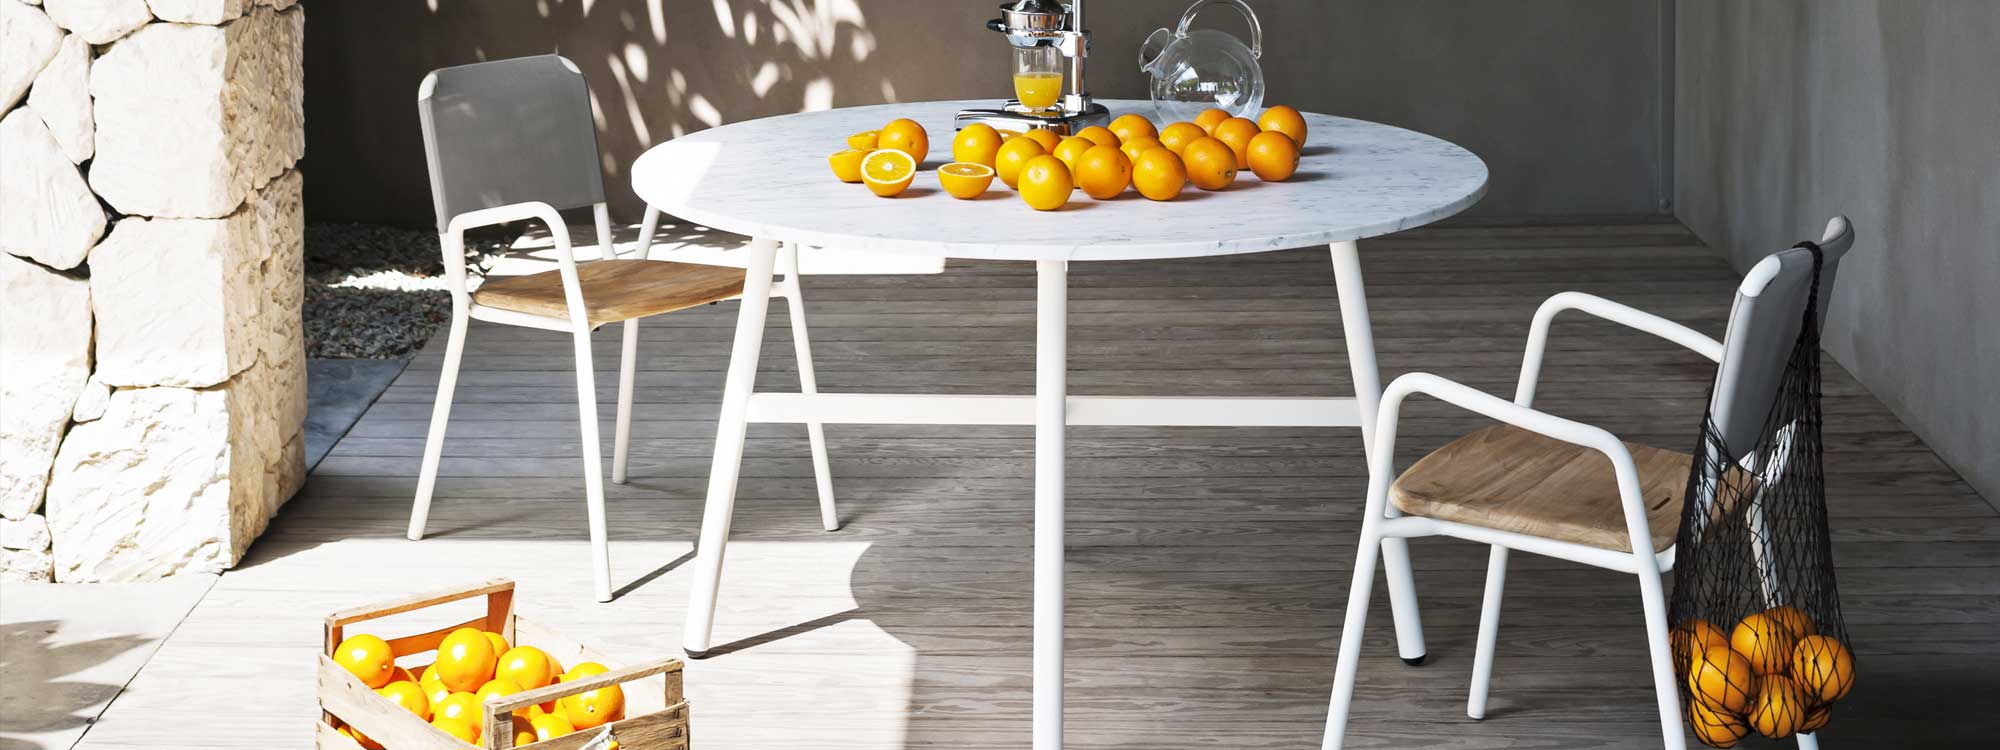 Image of RODA Gamma round garden table with white legs and carrara marble table top, with oranges ready to be pressed on the table top